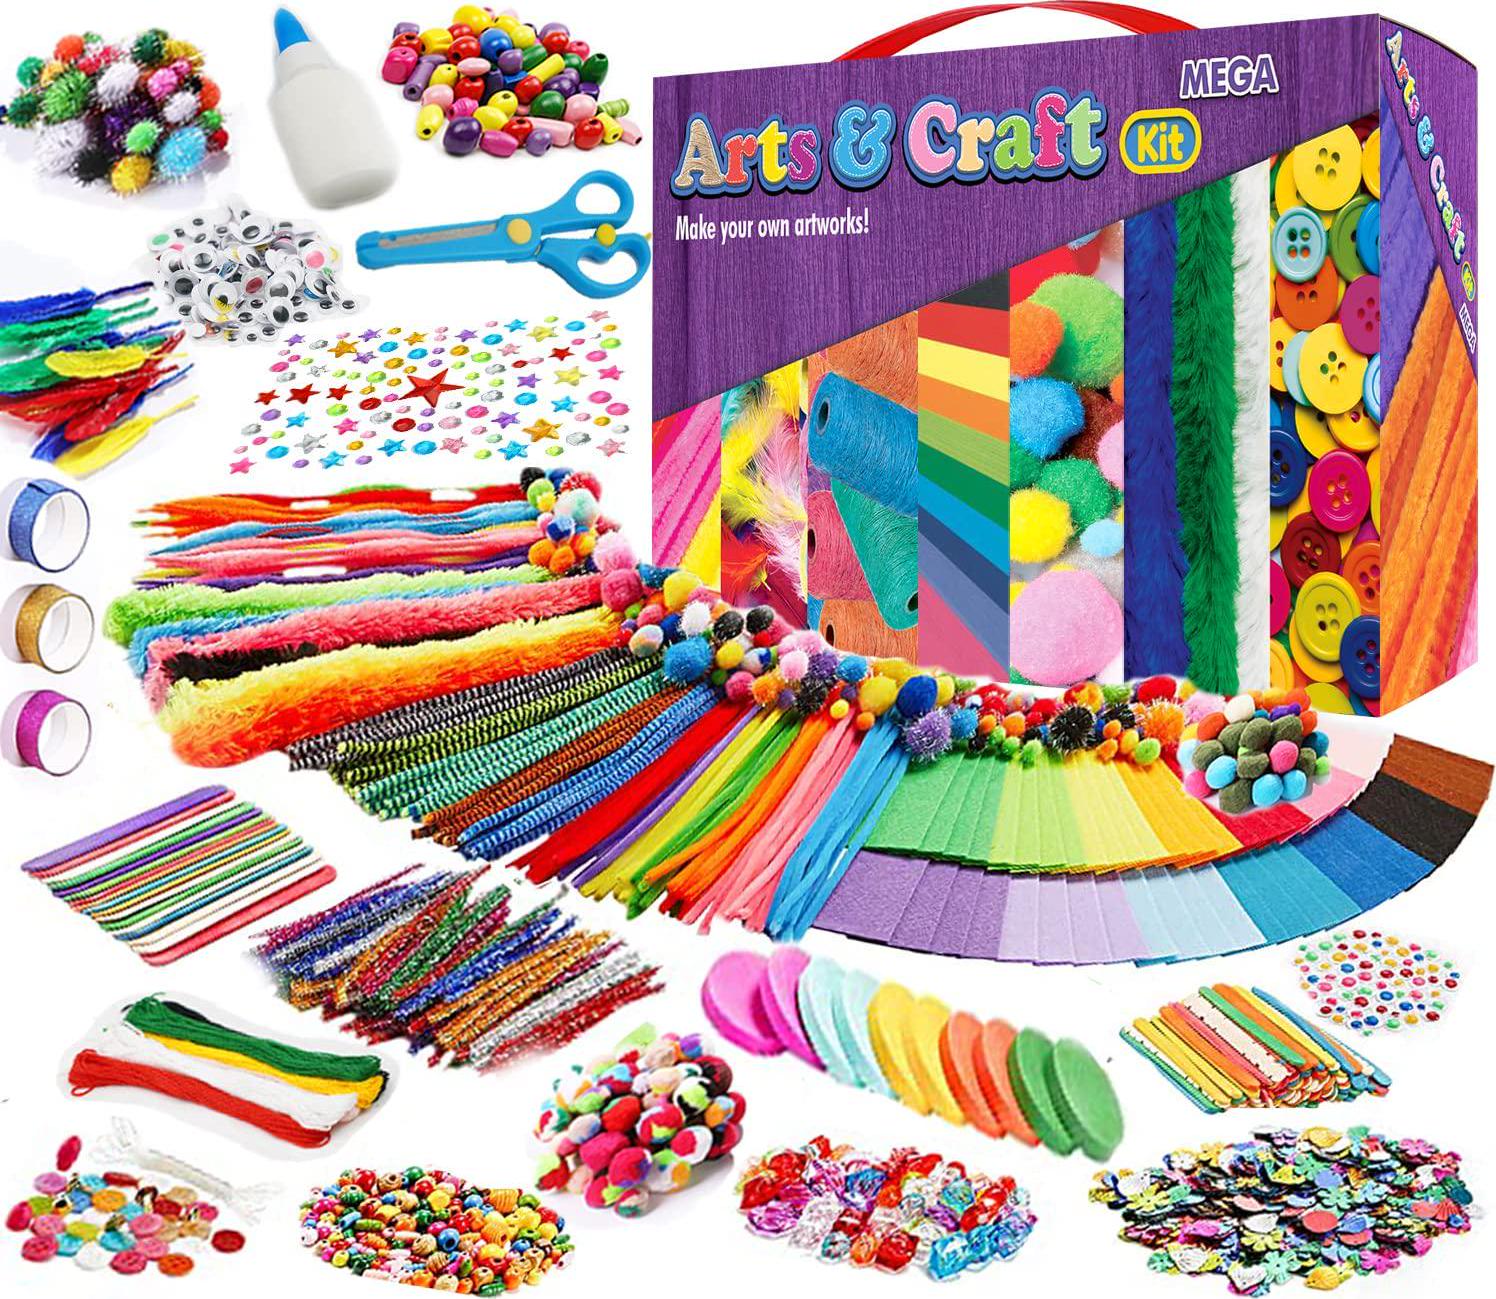 Goody King, GoodyKing Arts and Crafts Supplies Kit for Kids - Assorted Crafting Supply Bundle Set with Glue Stick for Preschool Activity - All in One DIY Crafting Projects Materials for Toddlers Ages 4 5 6 7 8 9